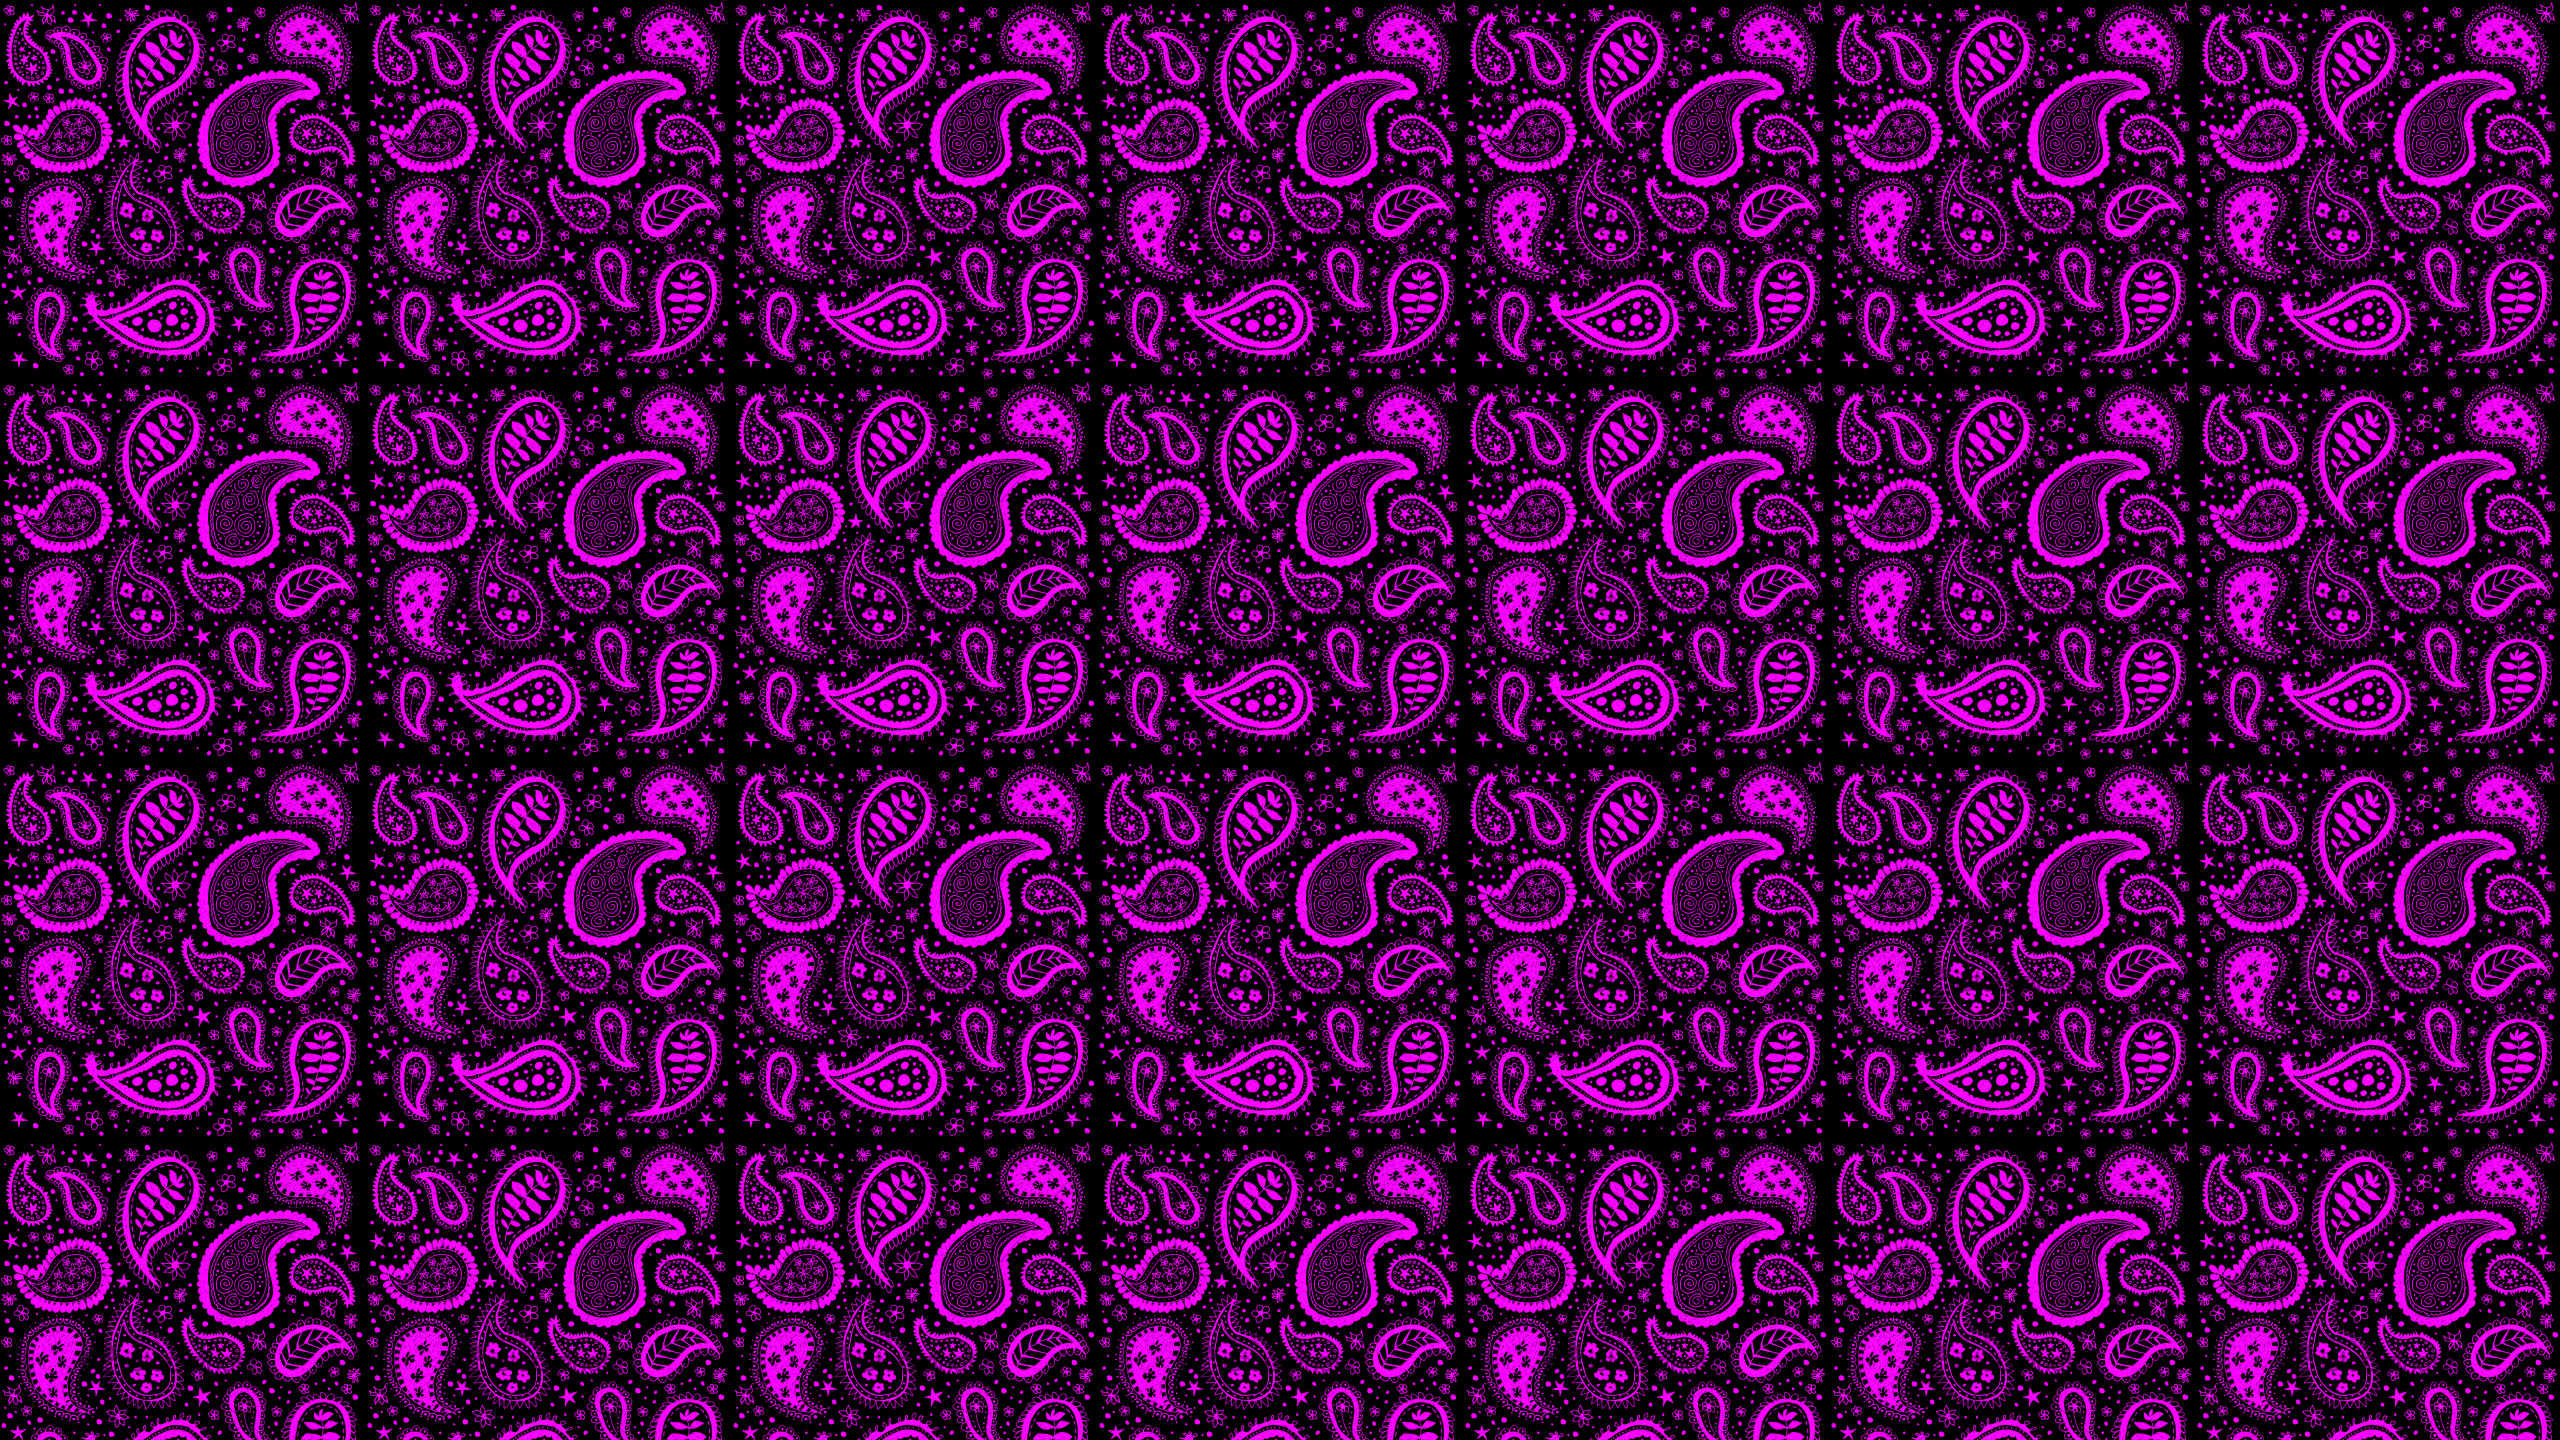 Hot Pink Paisley Desktop Wallpaper is easy Just save the wallpaper